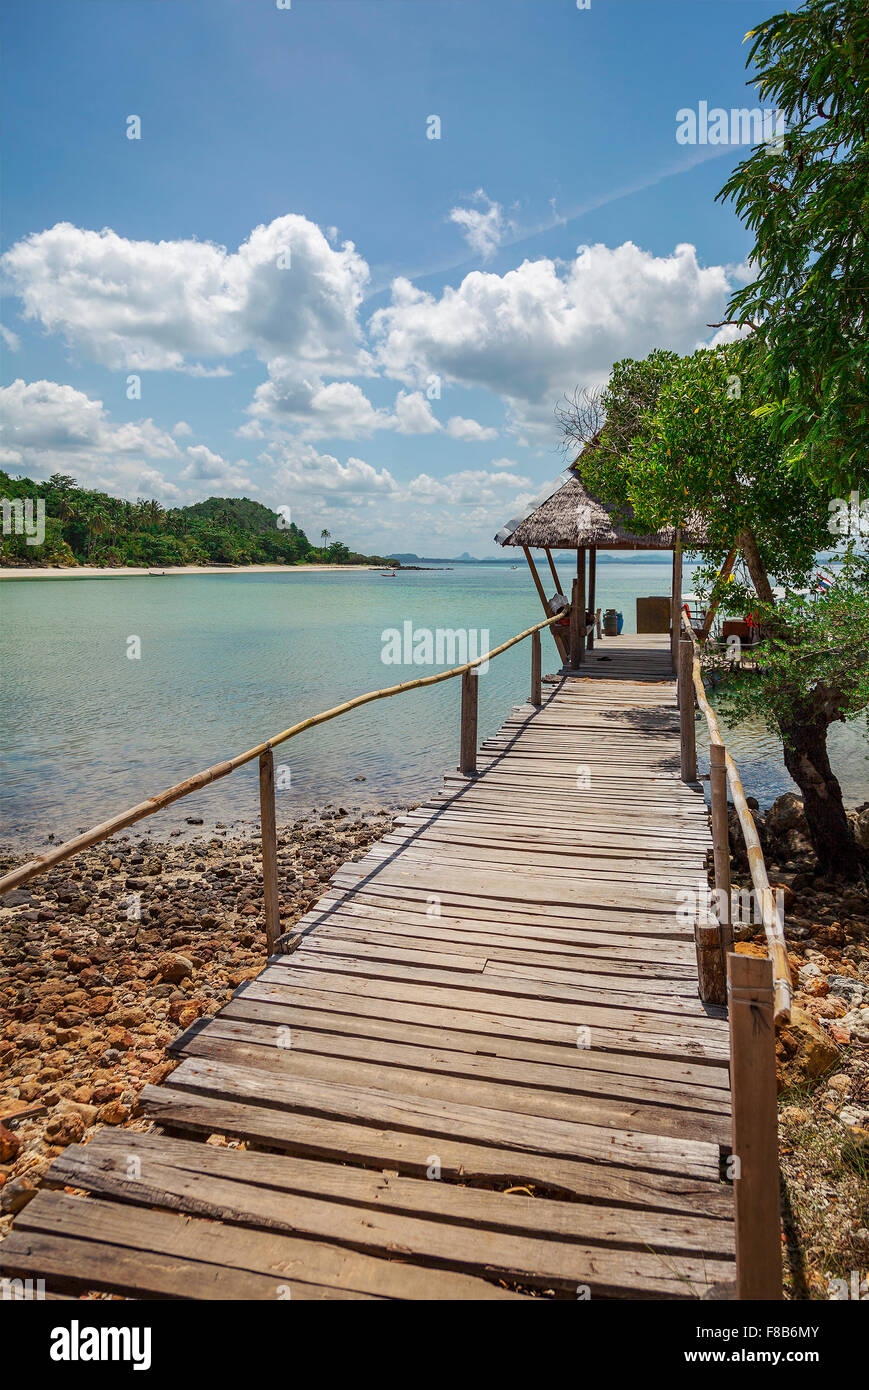 Image of a wooden jetty leading to a beach hut. Thailand. Stock Photo